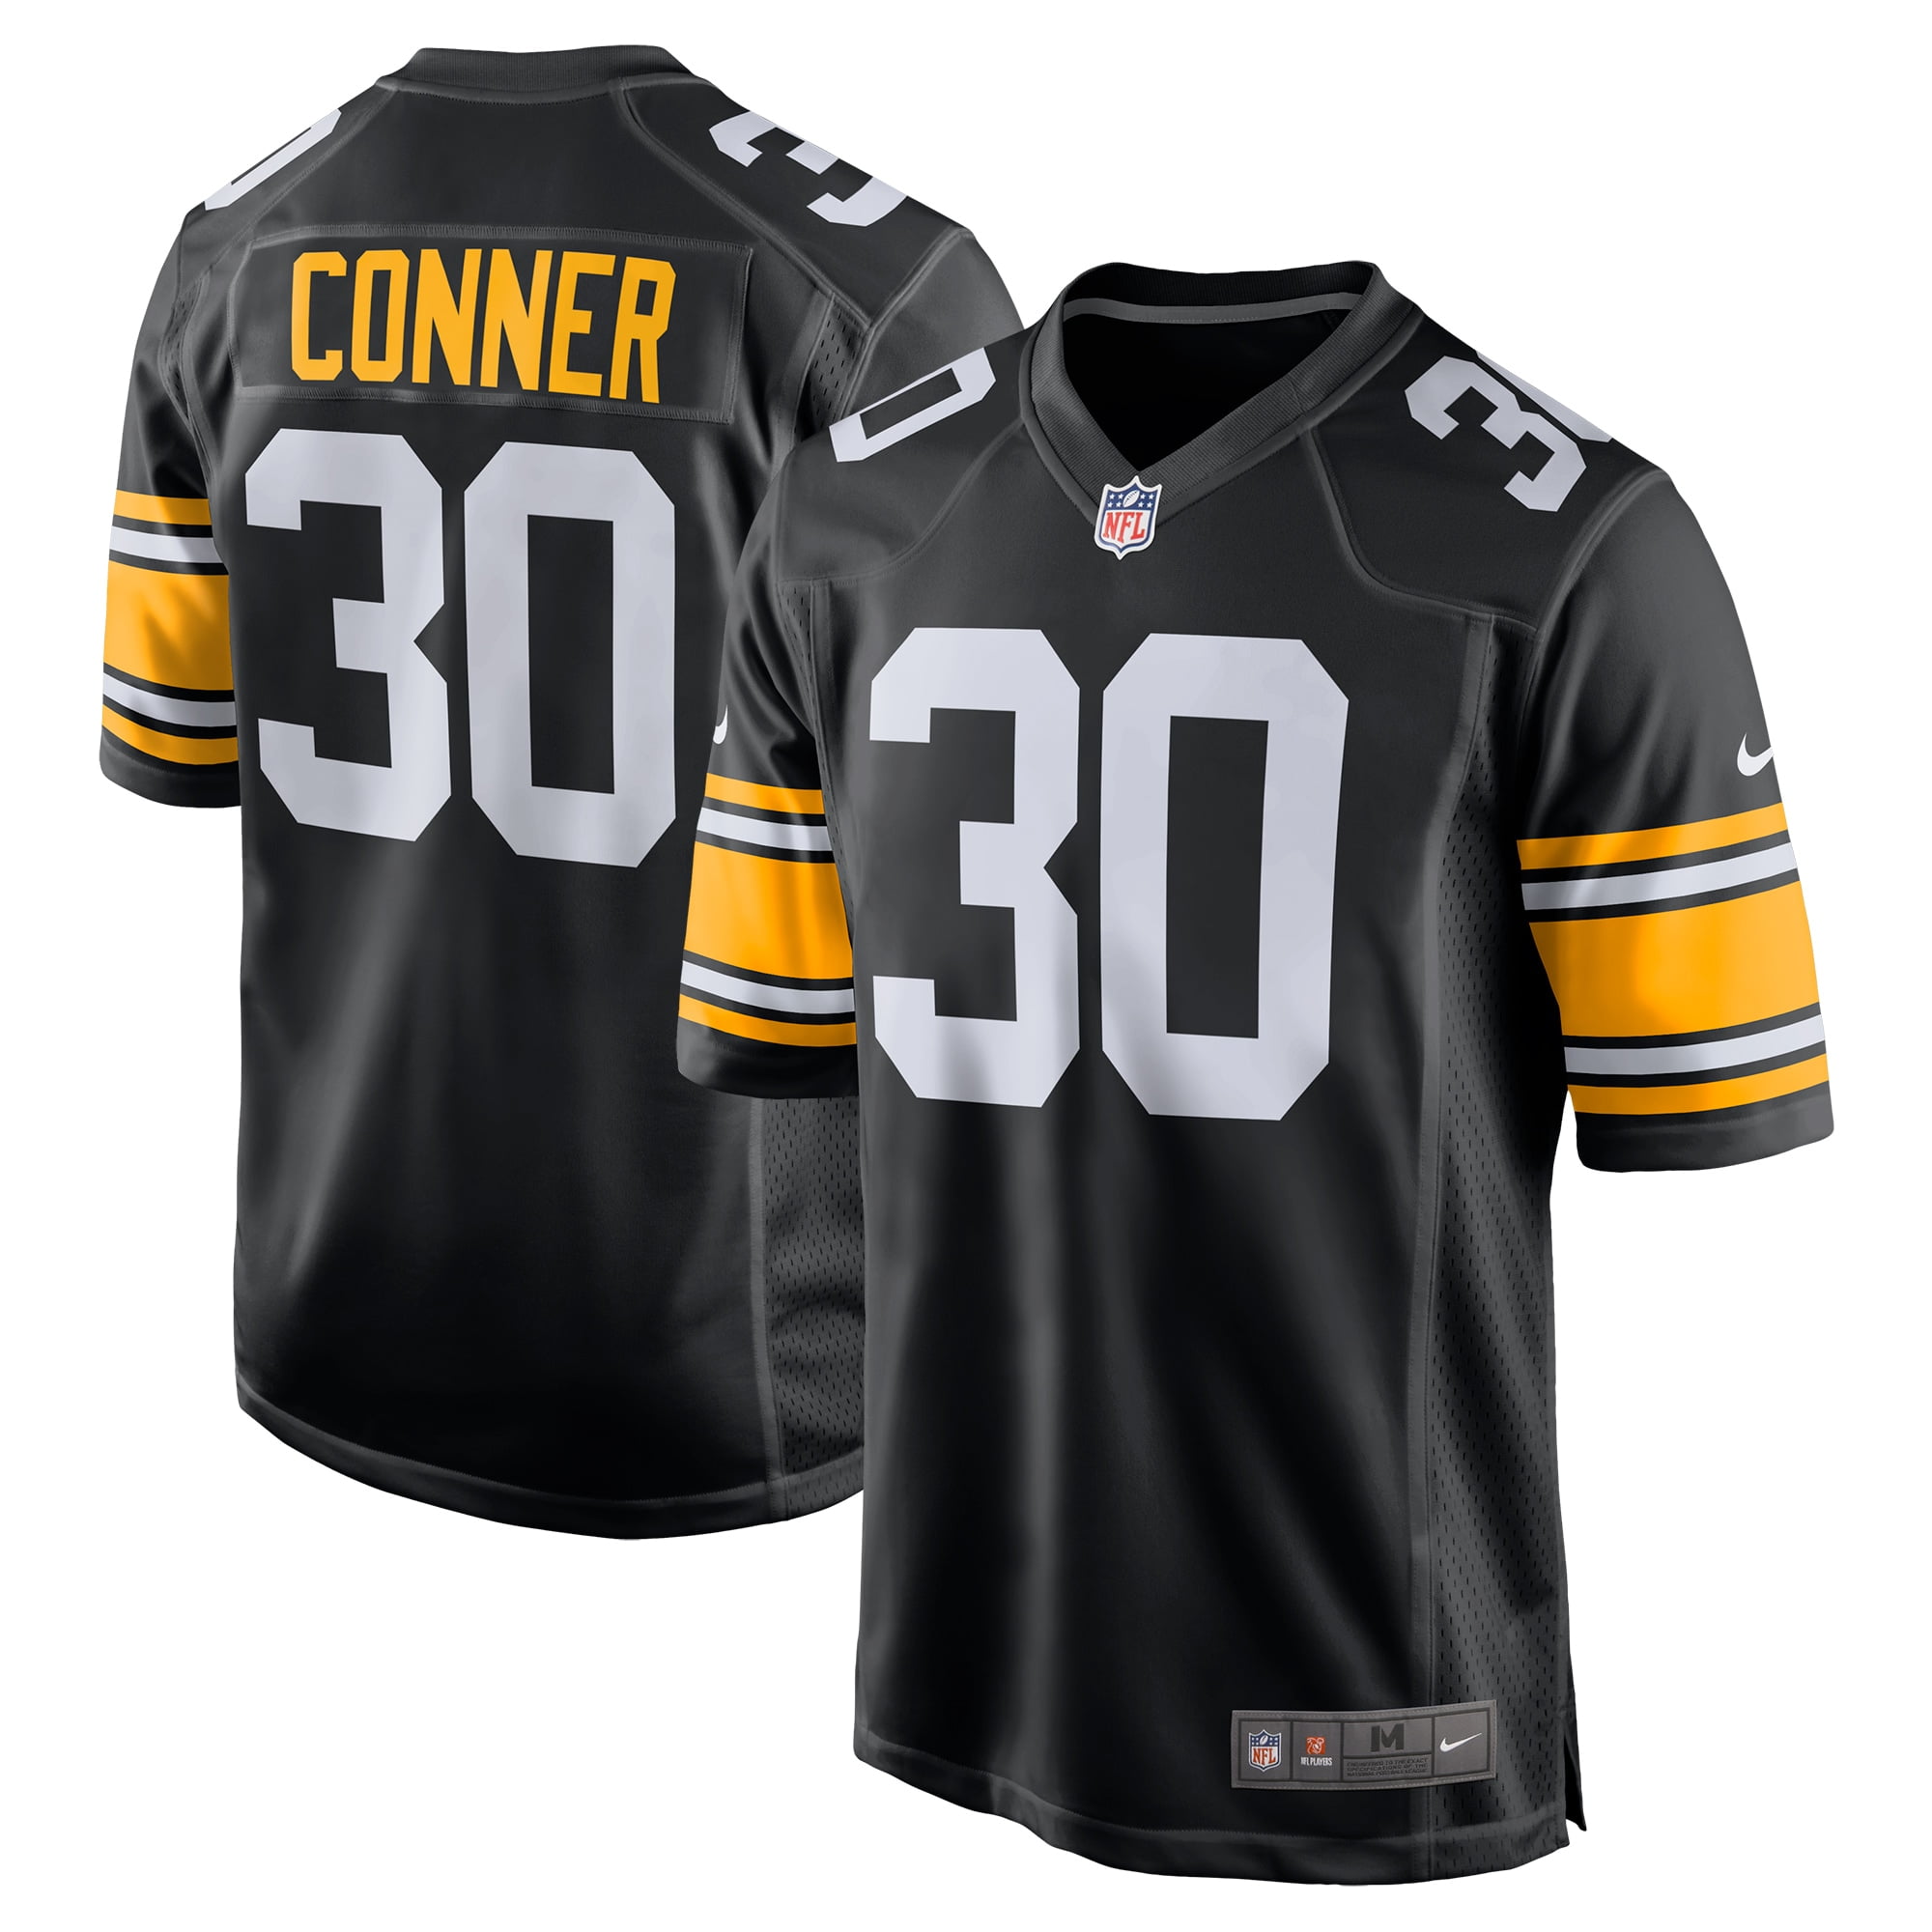 james conner jersey youth